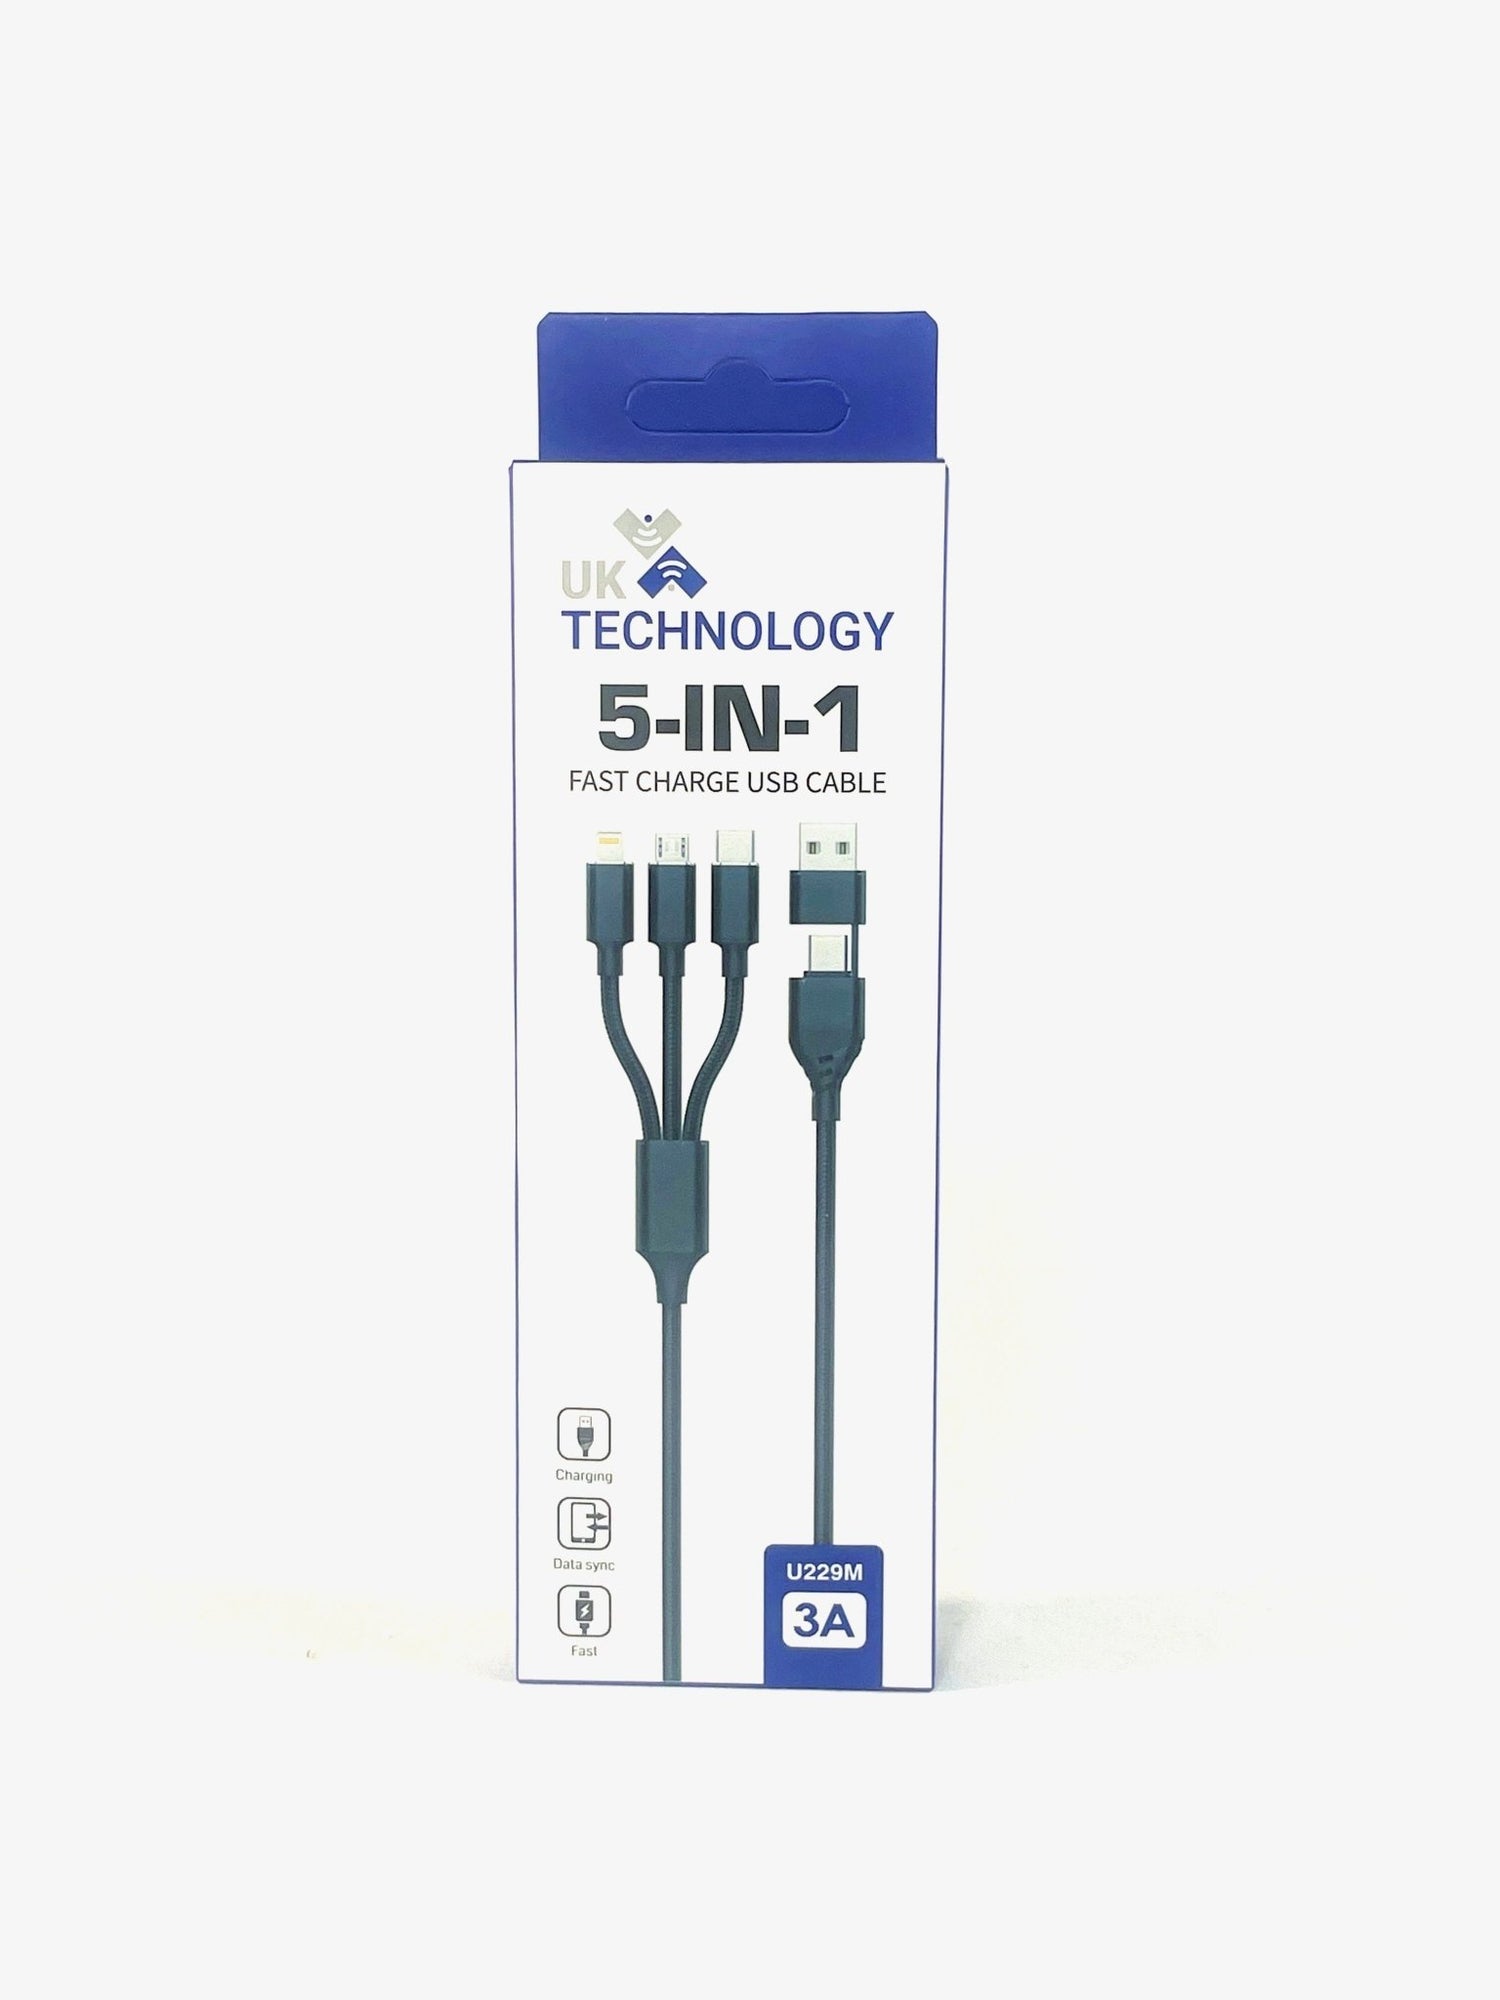 UK Technology 5-in-1 Charging Cable front view of packaging